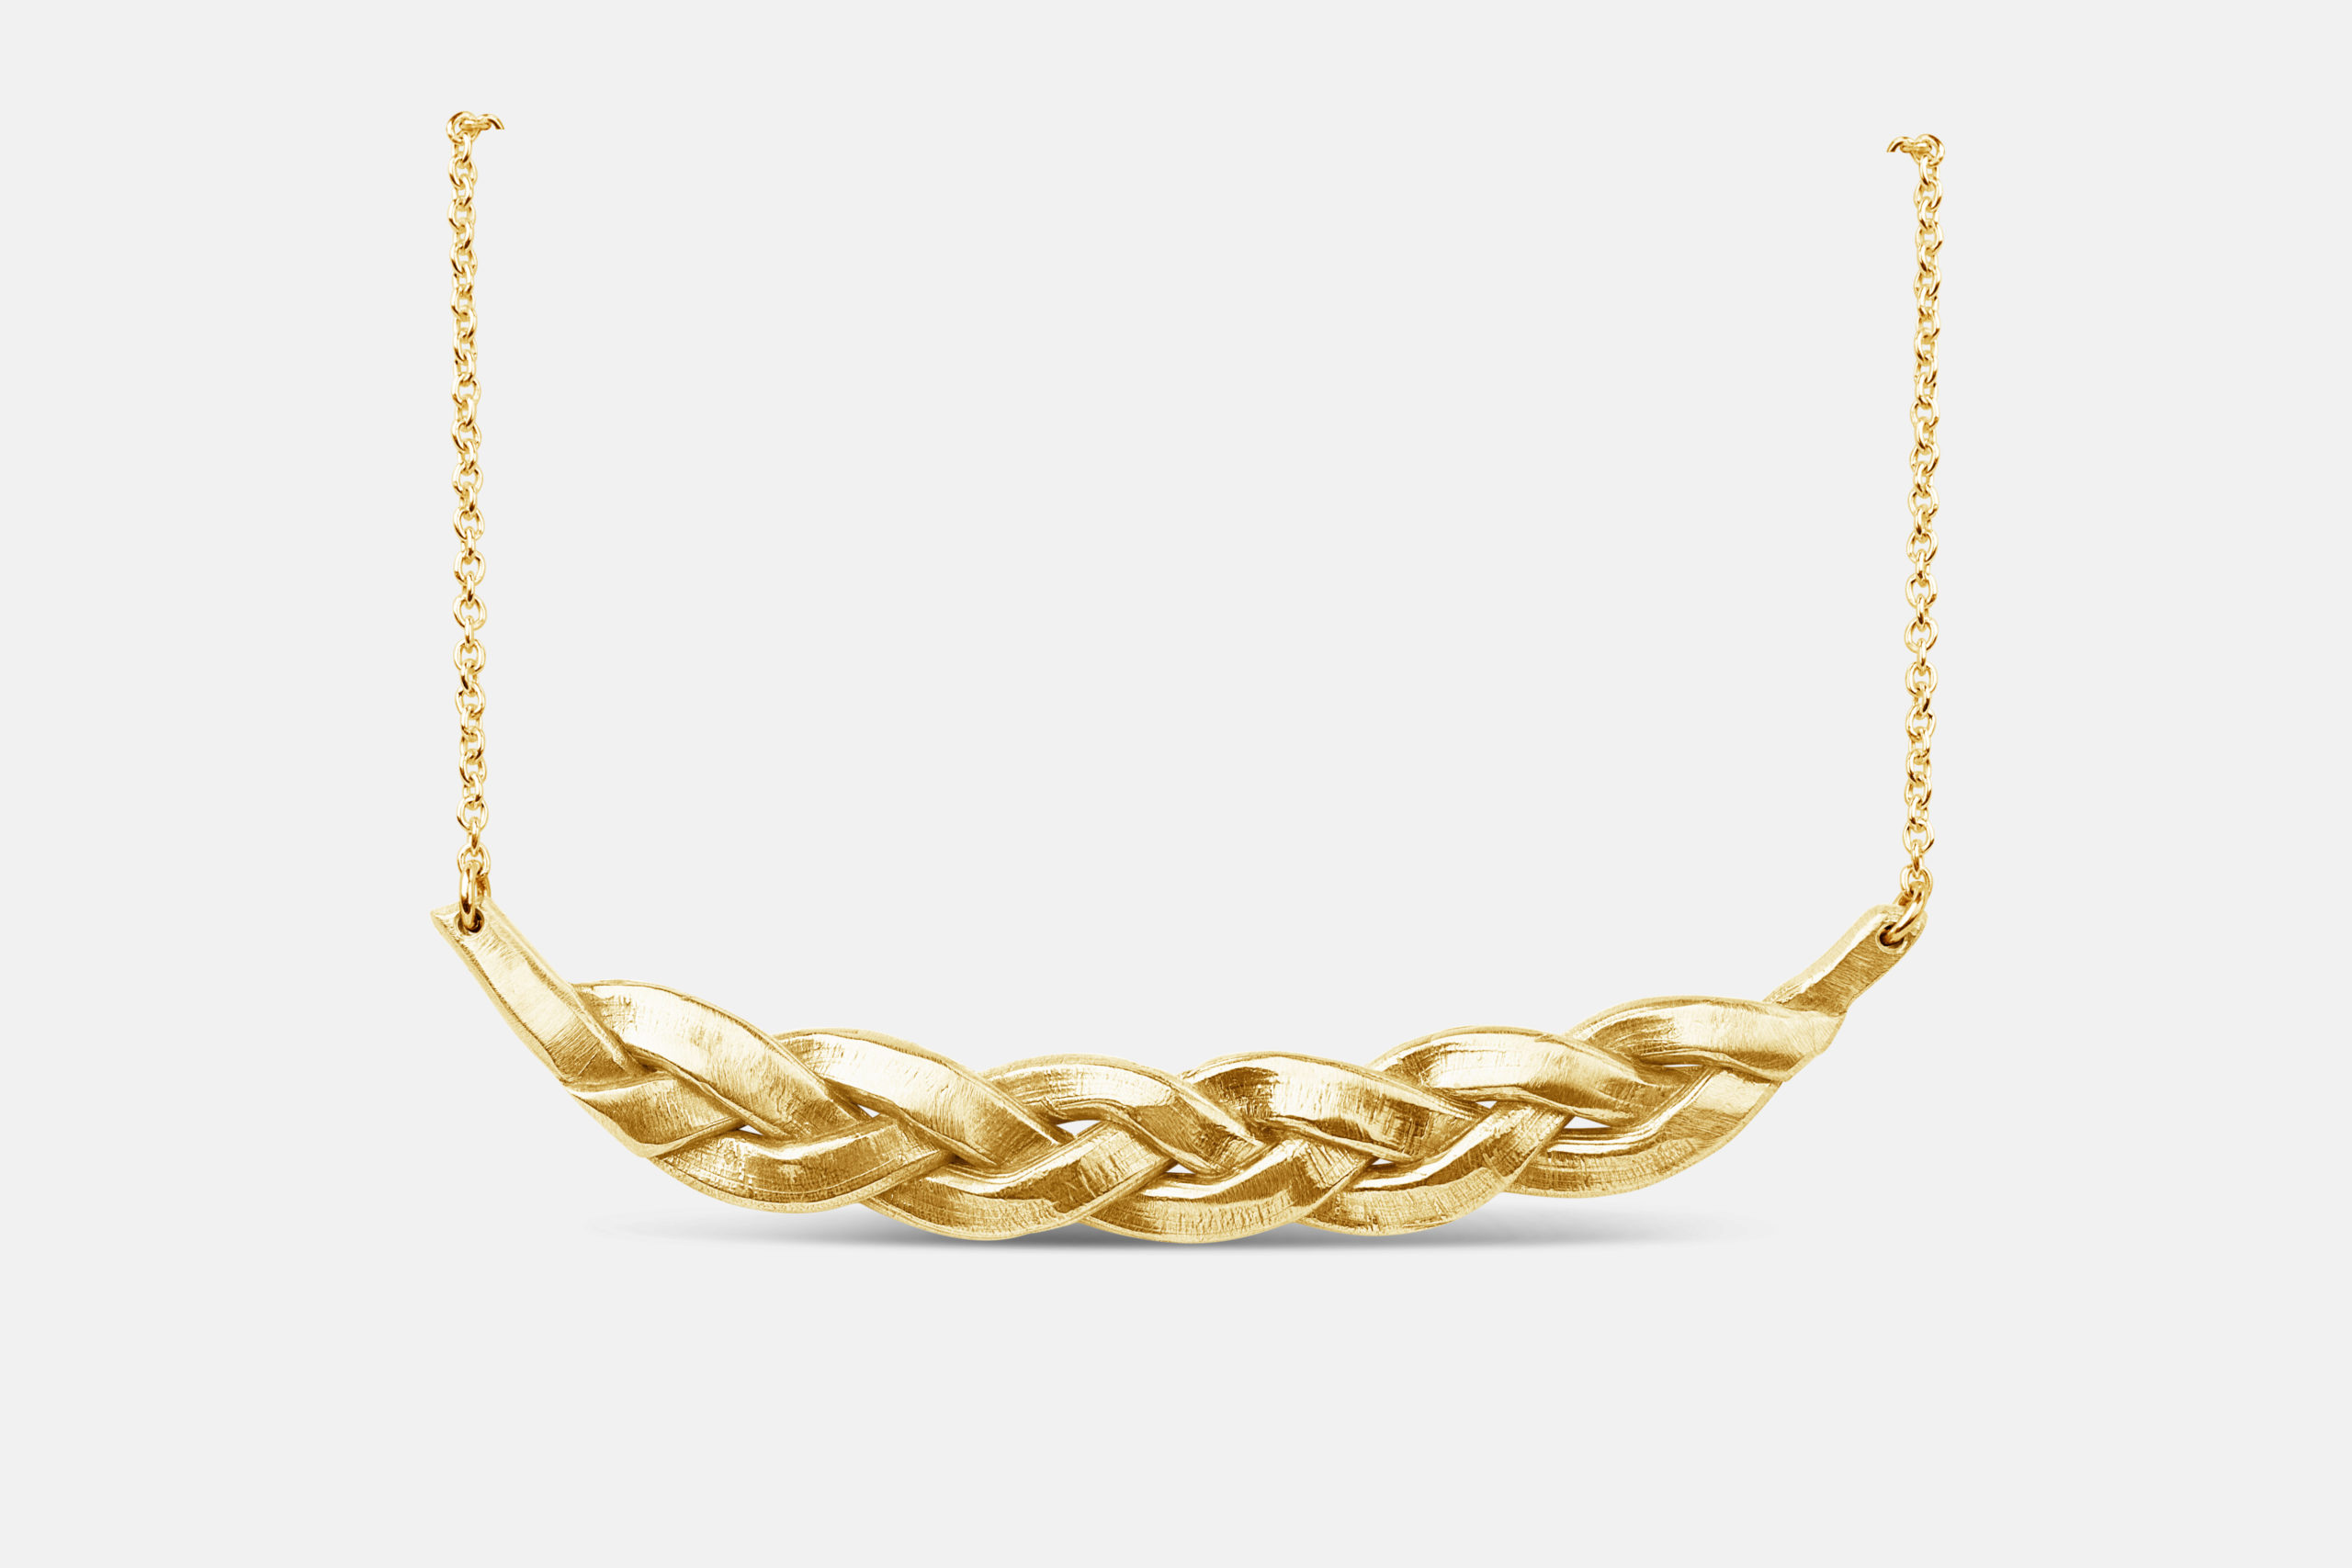 Batur Braided necklace in Gold